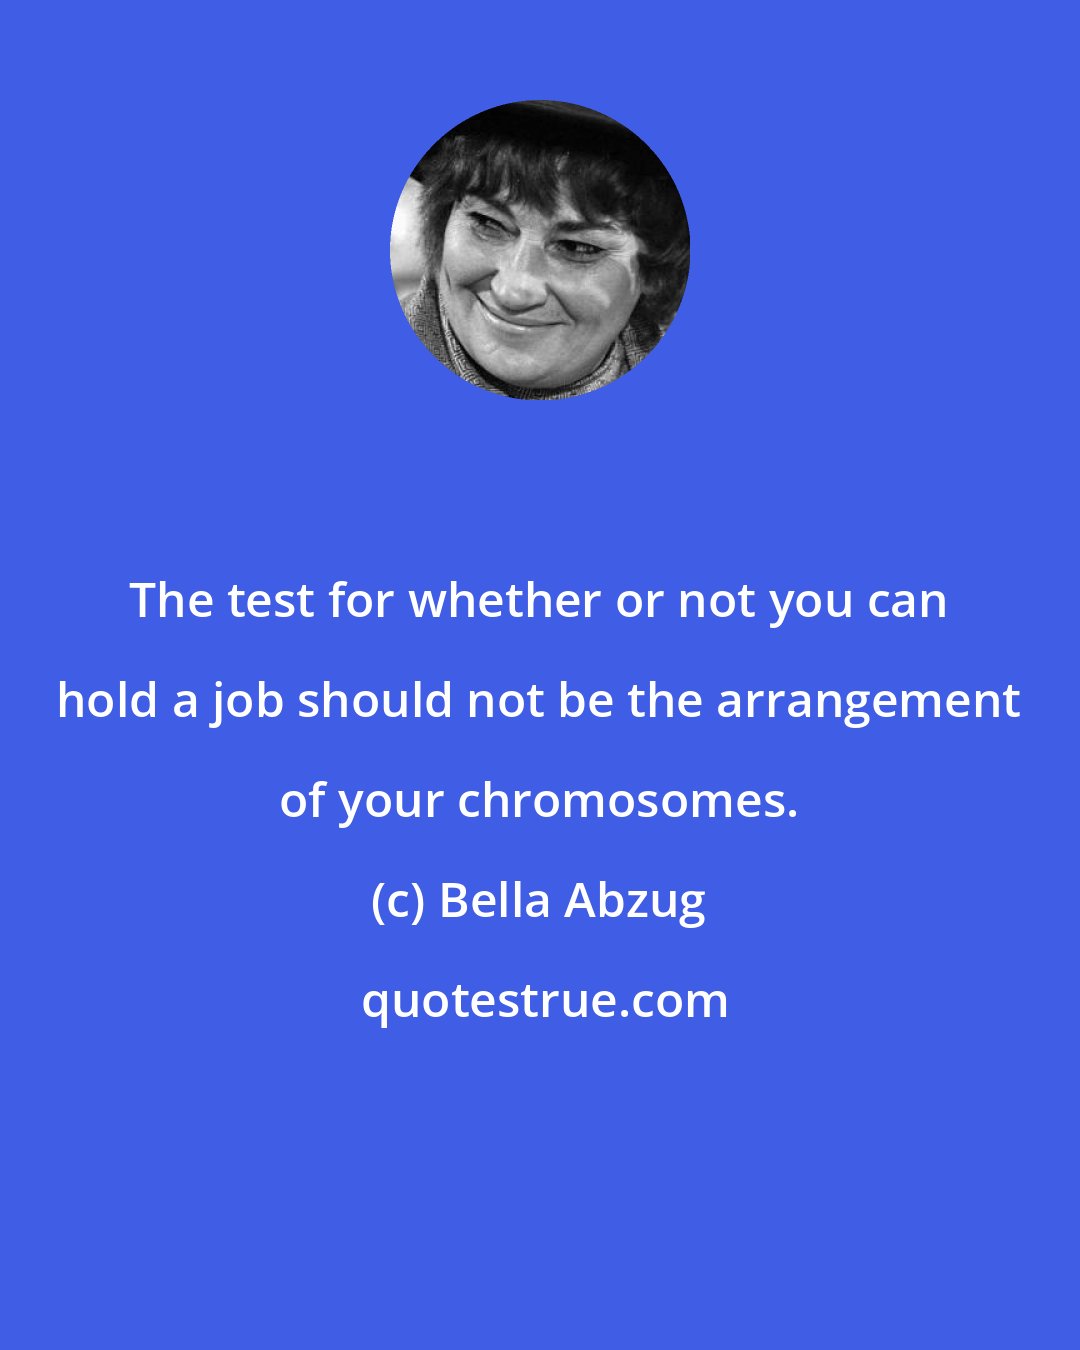 Bella Abzug: The test for whether or not you can hold a job should not be the arrangement of your chromosomes.